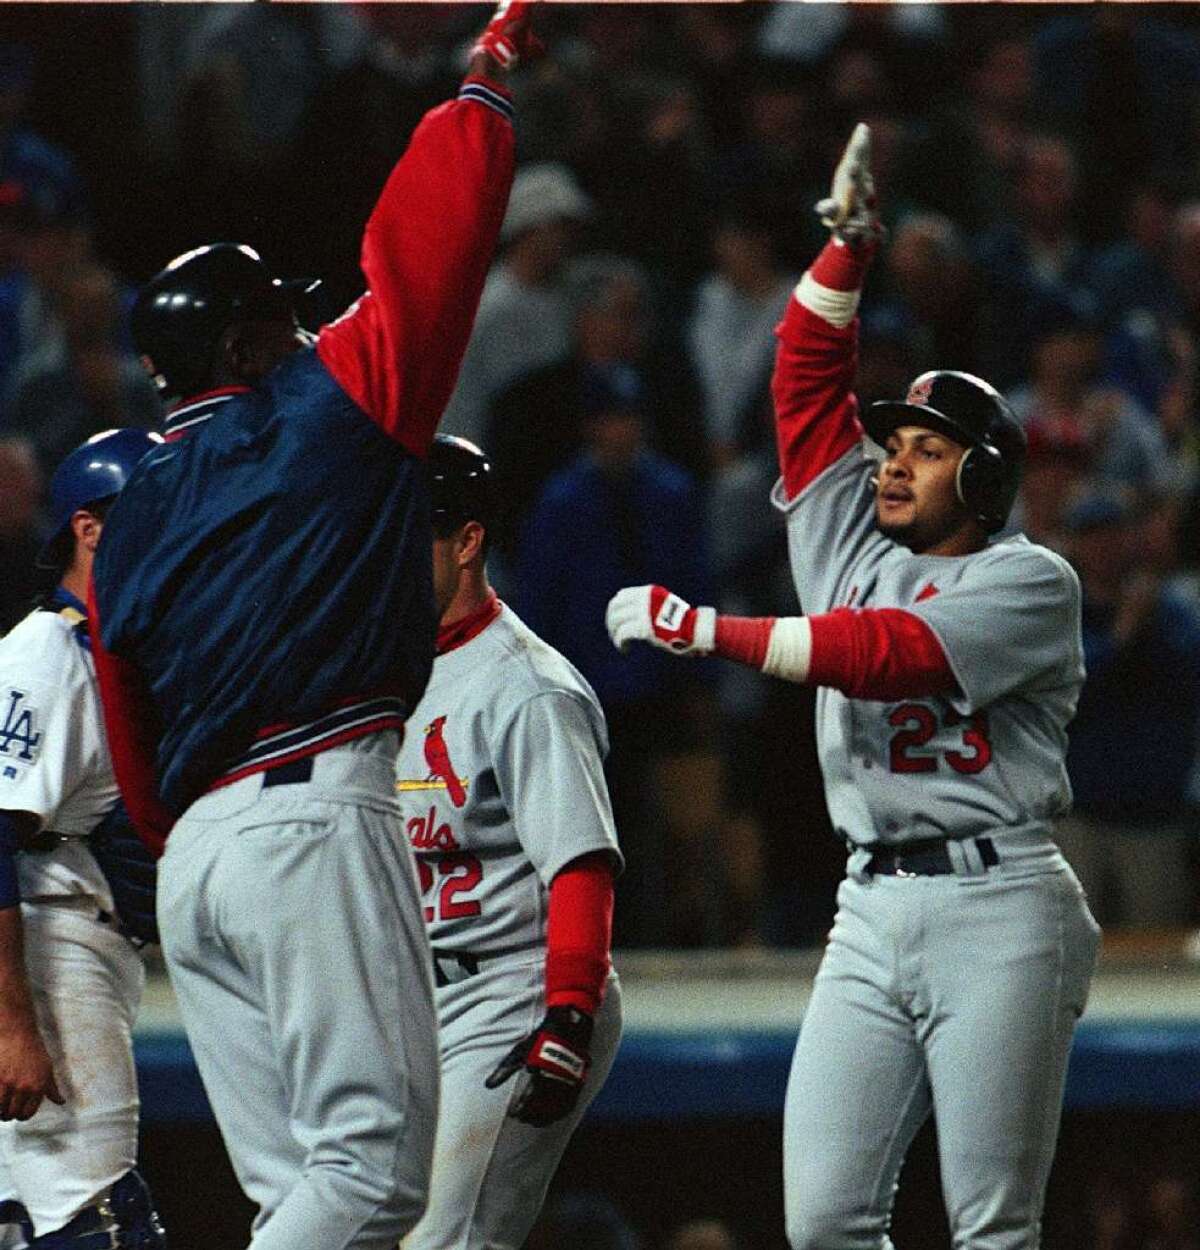 St. Louis Cardinals' Fernando Tatis, right, is greeted at home plate after hitting his second grand slam in the same inning off of DodgerS pitcher Chan Ho Park on April 23, 1999, at Dodger Stadium.